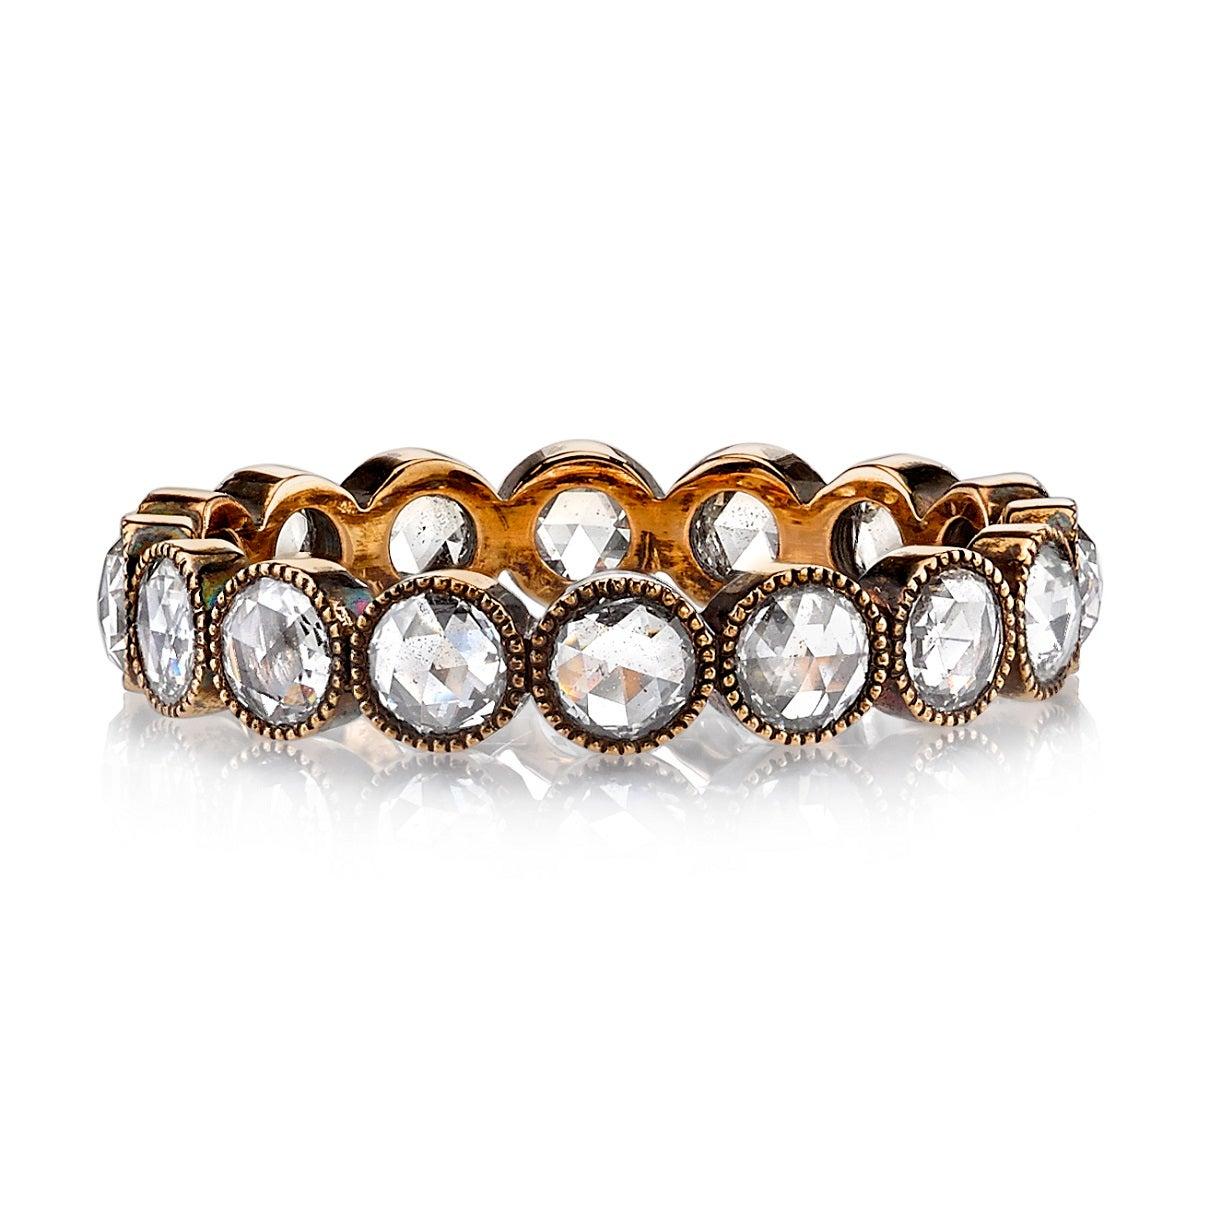 For Sale:  Handcrafted Gabby Rose Cut Diamond Eternity Band by Single Stone 4